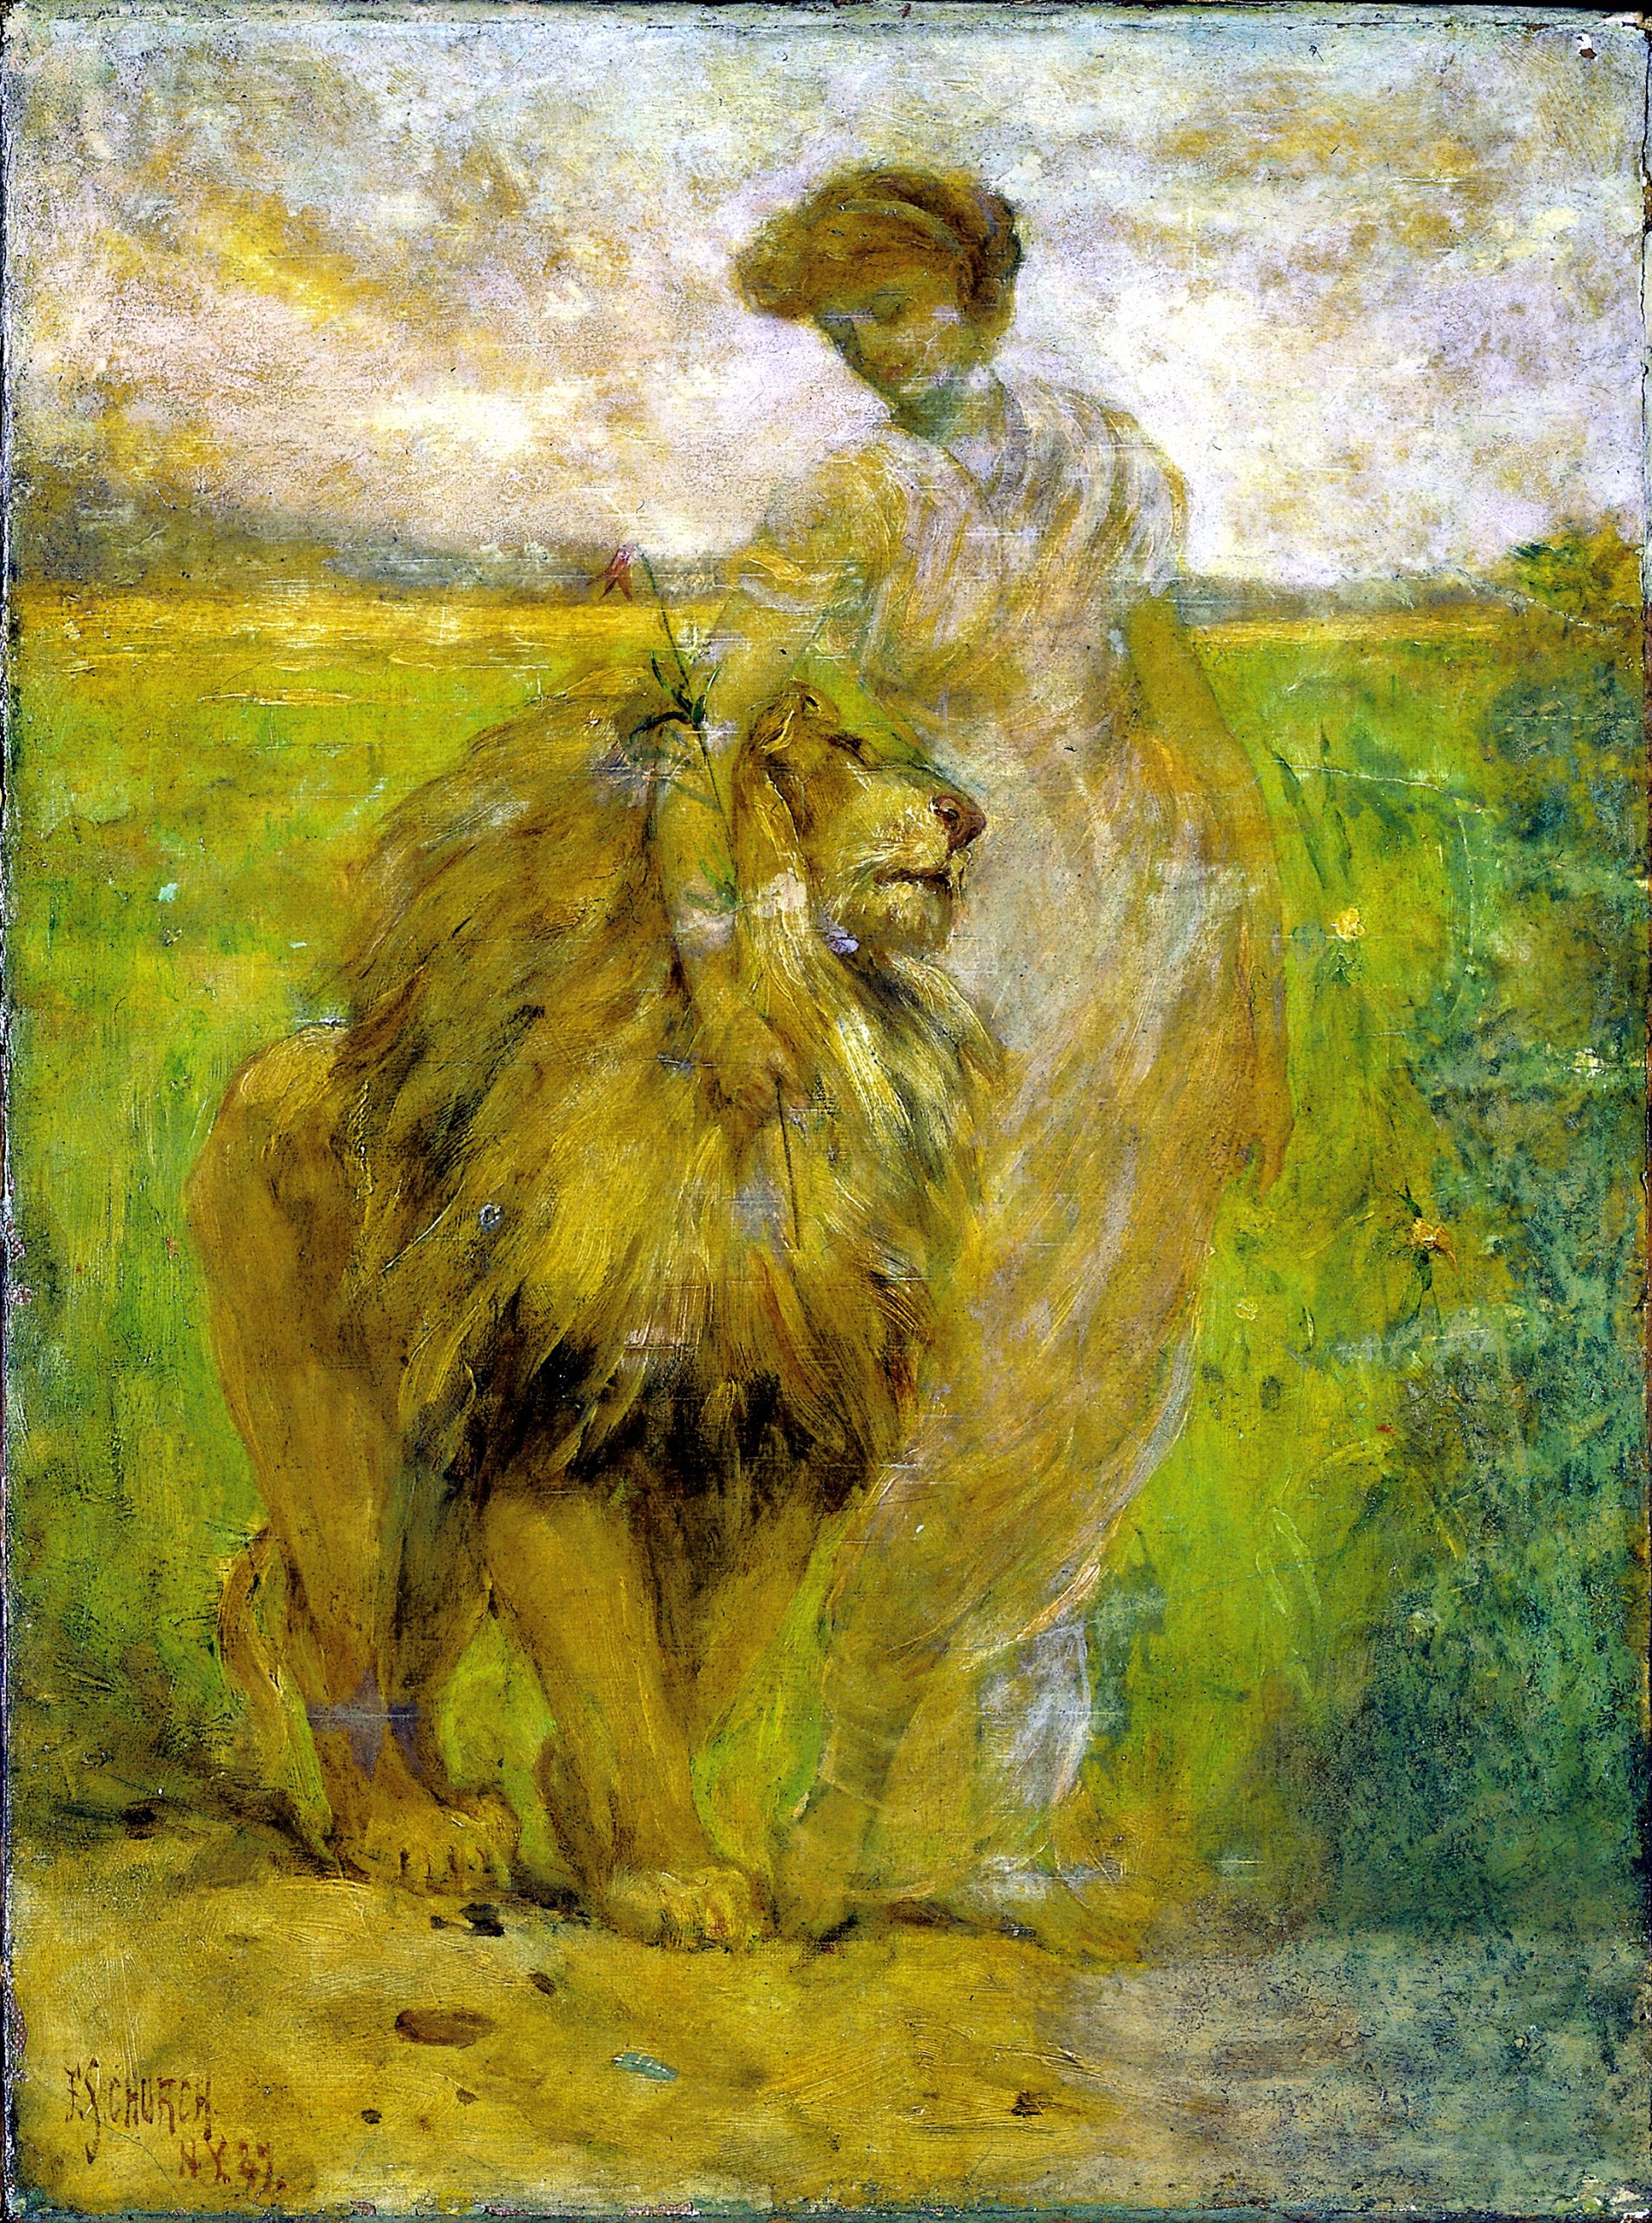 A young woman rests her hand on the side of a lion's head as they both walk through an abstract grassy landscape.